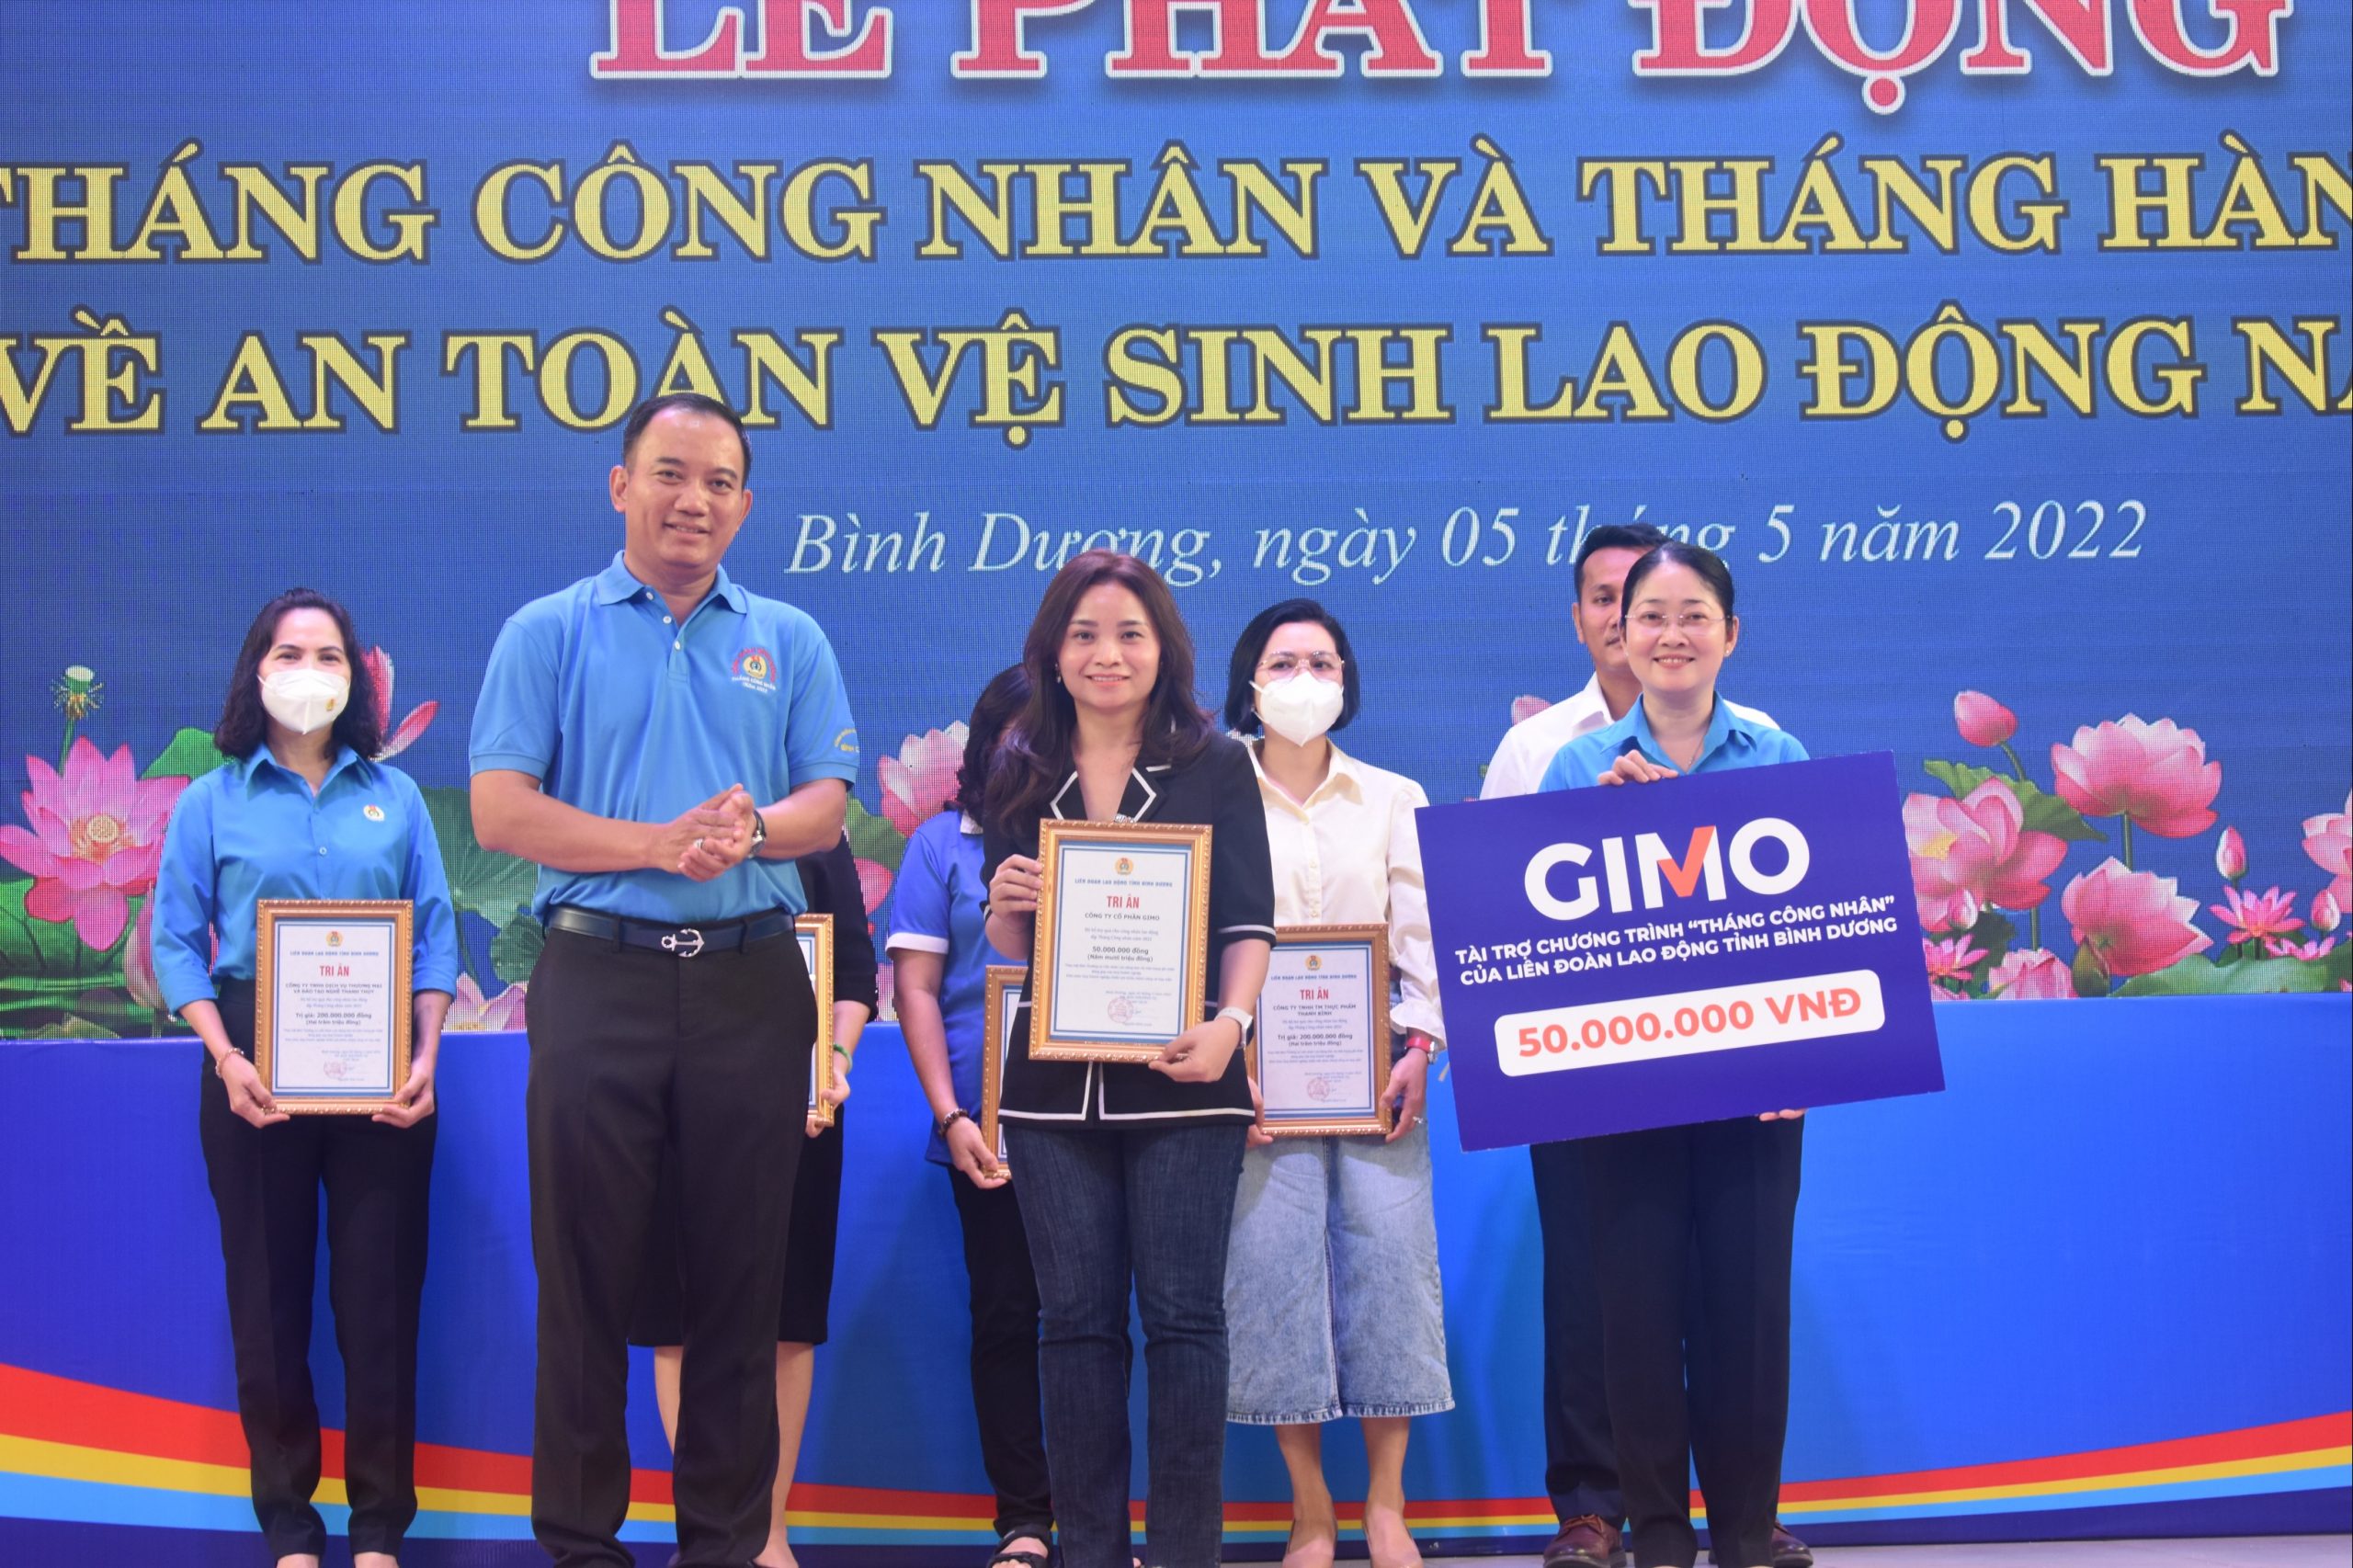 GIMO joins in with the festivities of Binh Duong’s Labor Month 2022